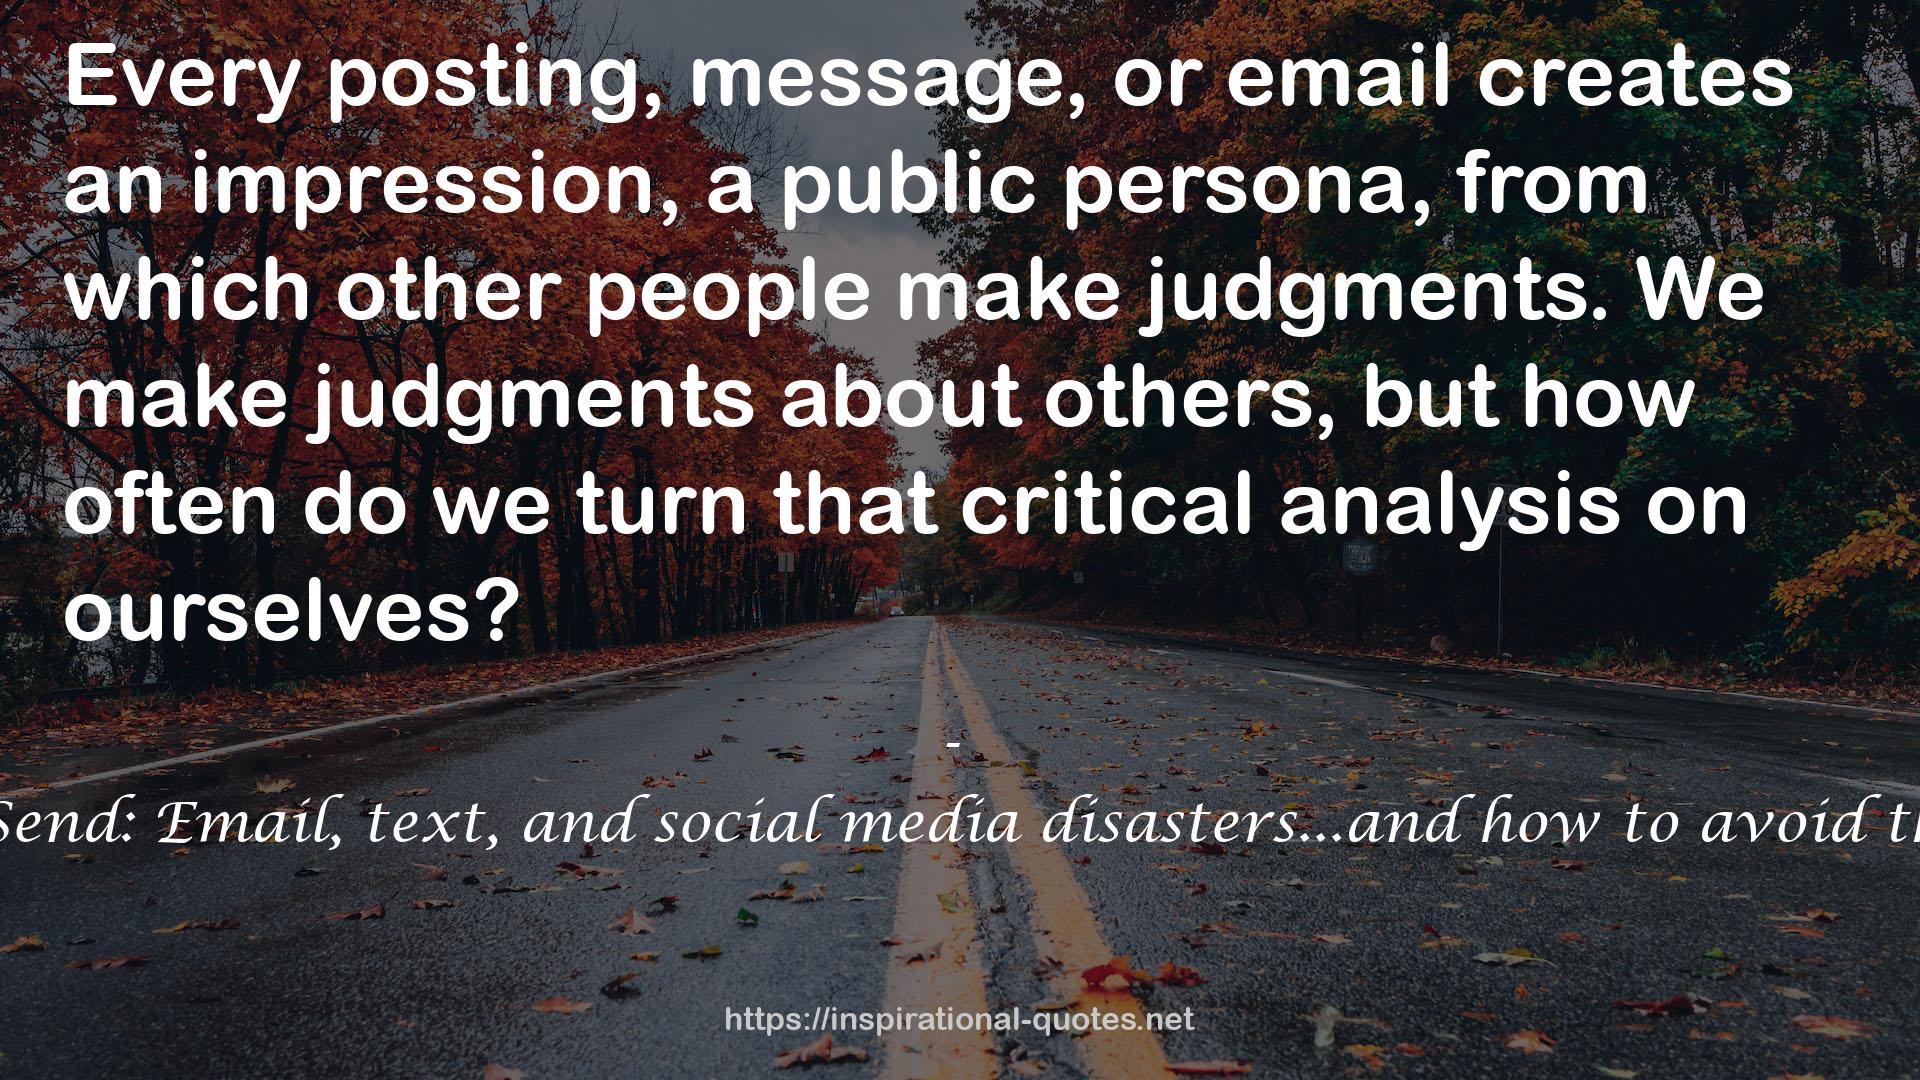 UnSend: Email, text, and social media disasters...and how to avoid them QUOTES